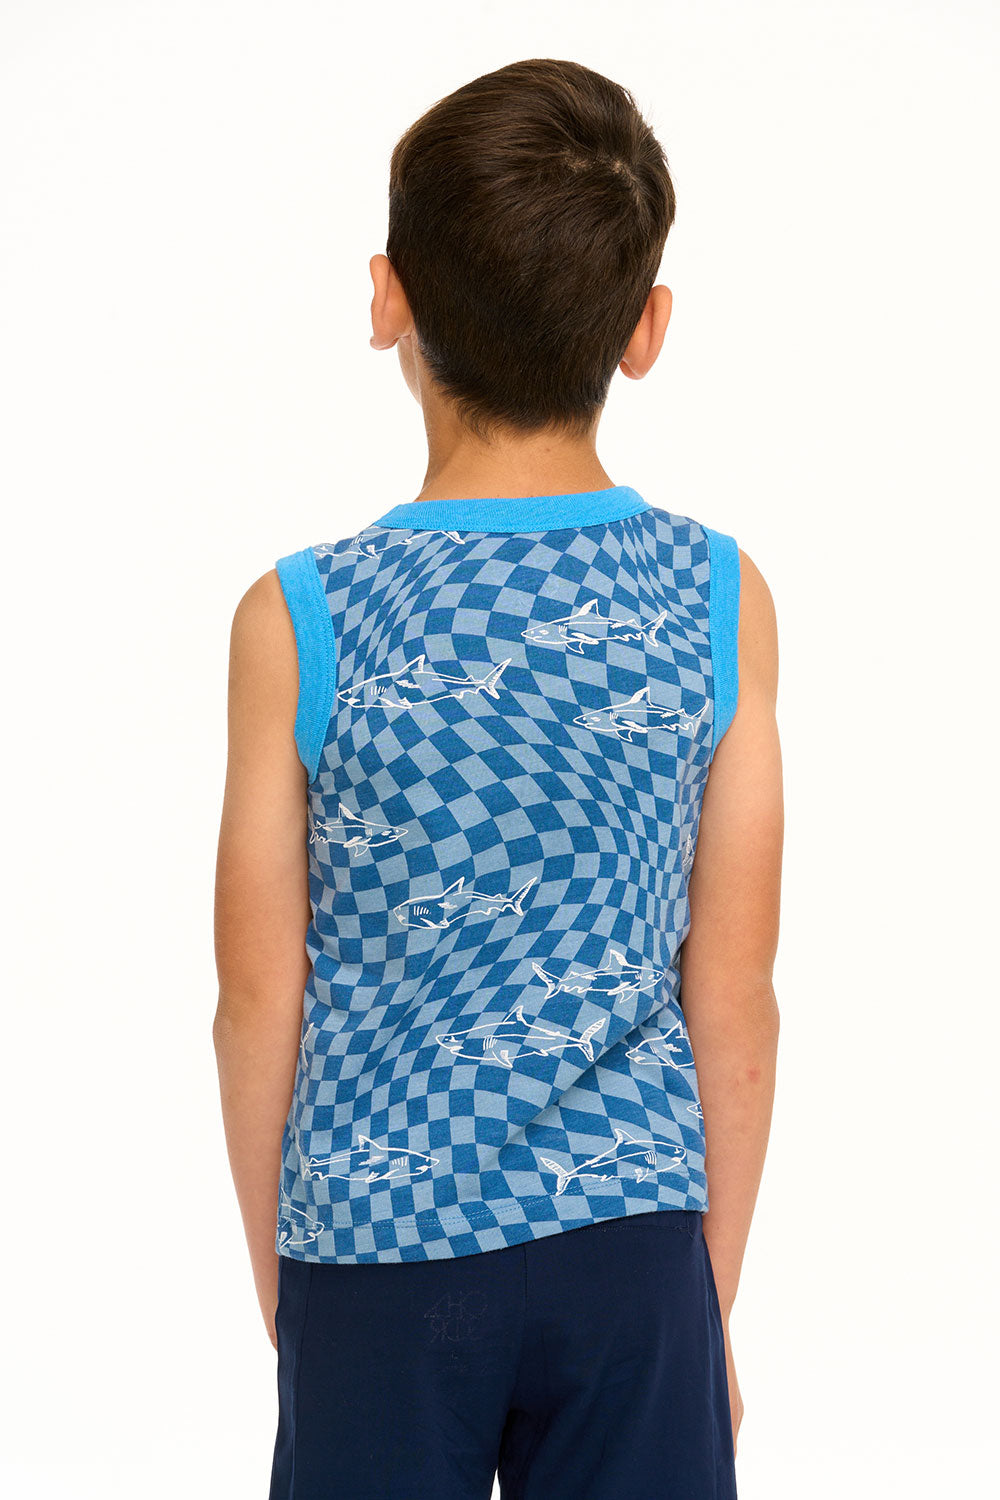 Boy's Checkered Shark Recycled Vintage Jersey Tank BOYS chaserbrand